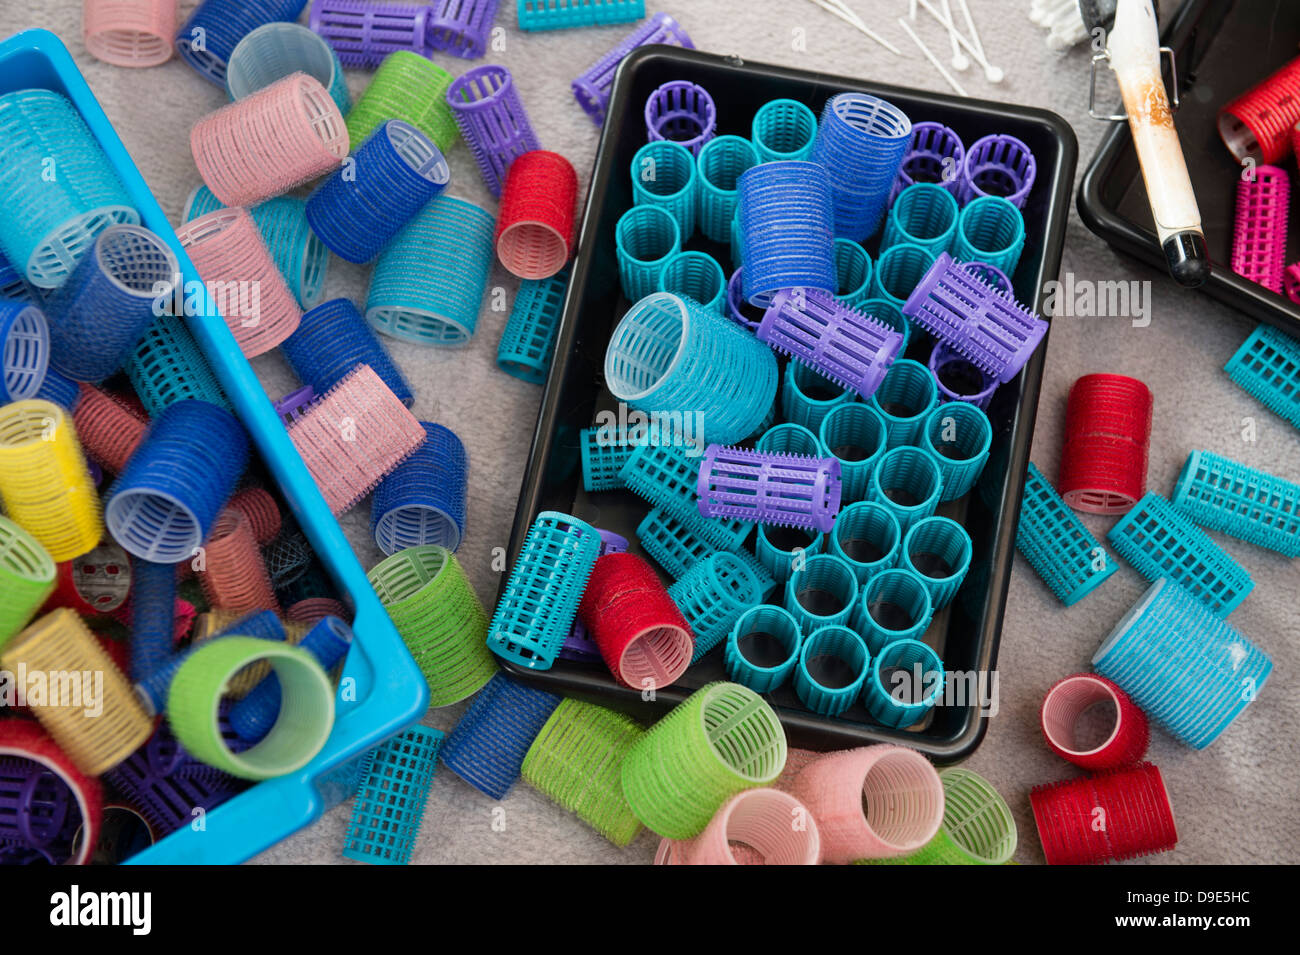 Brightly coloured plastic hair rollers Stock Photo - Alamy